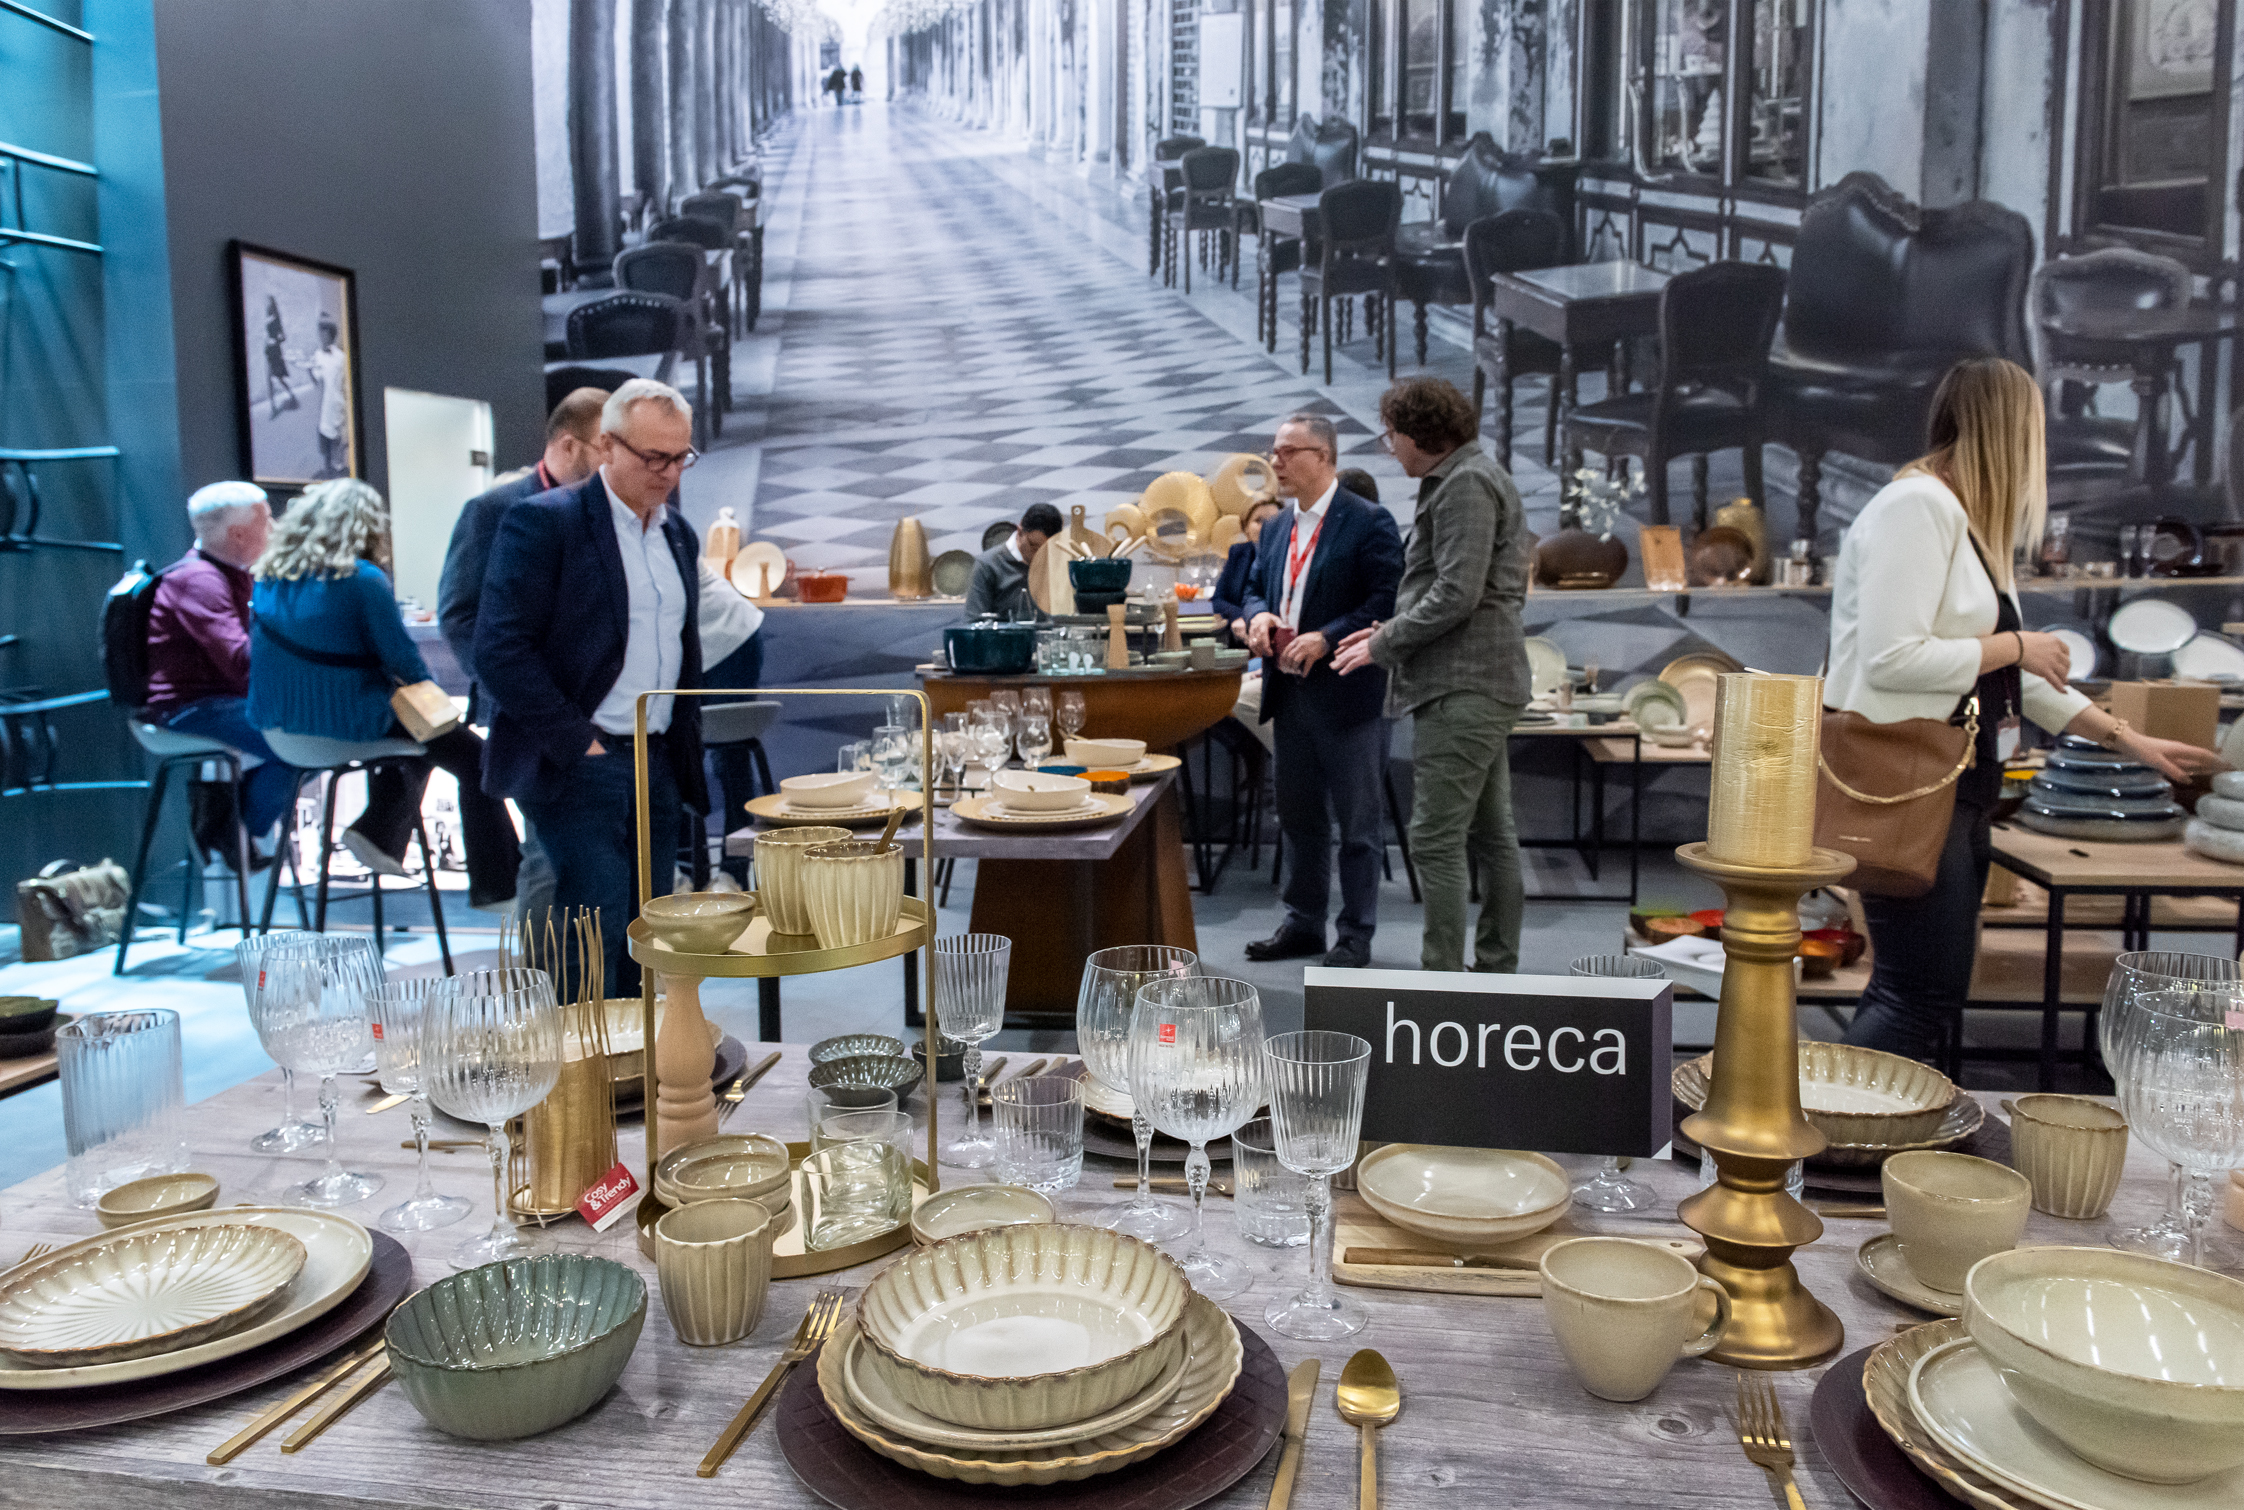 The Special Interest HoReCa offers the hospitality industry a tailor-made fringe programme in the HoReCa Academy at Ambiente 2024.